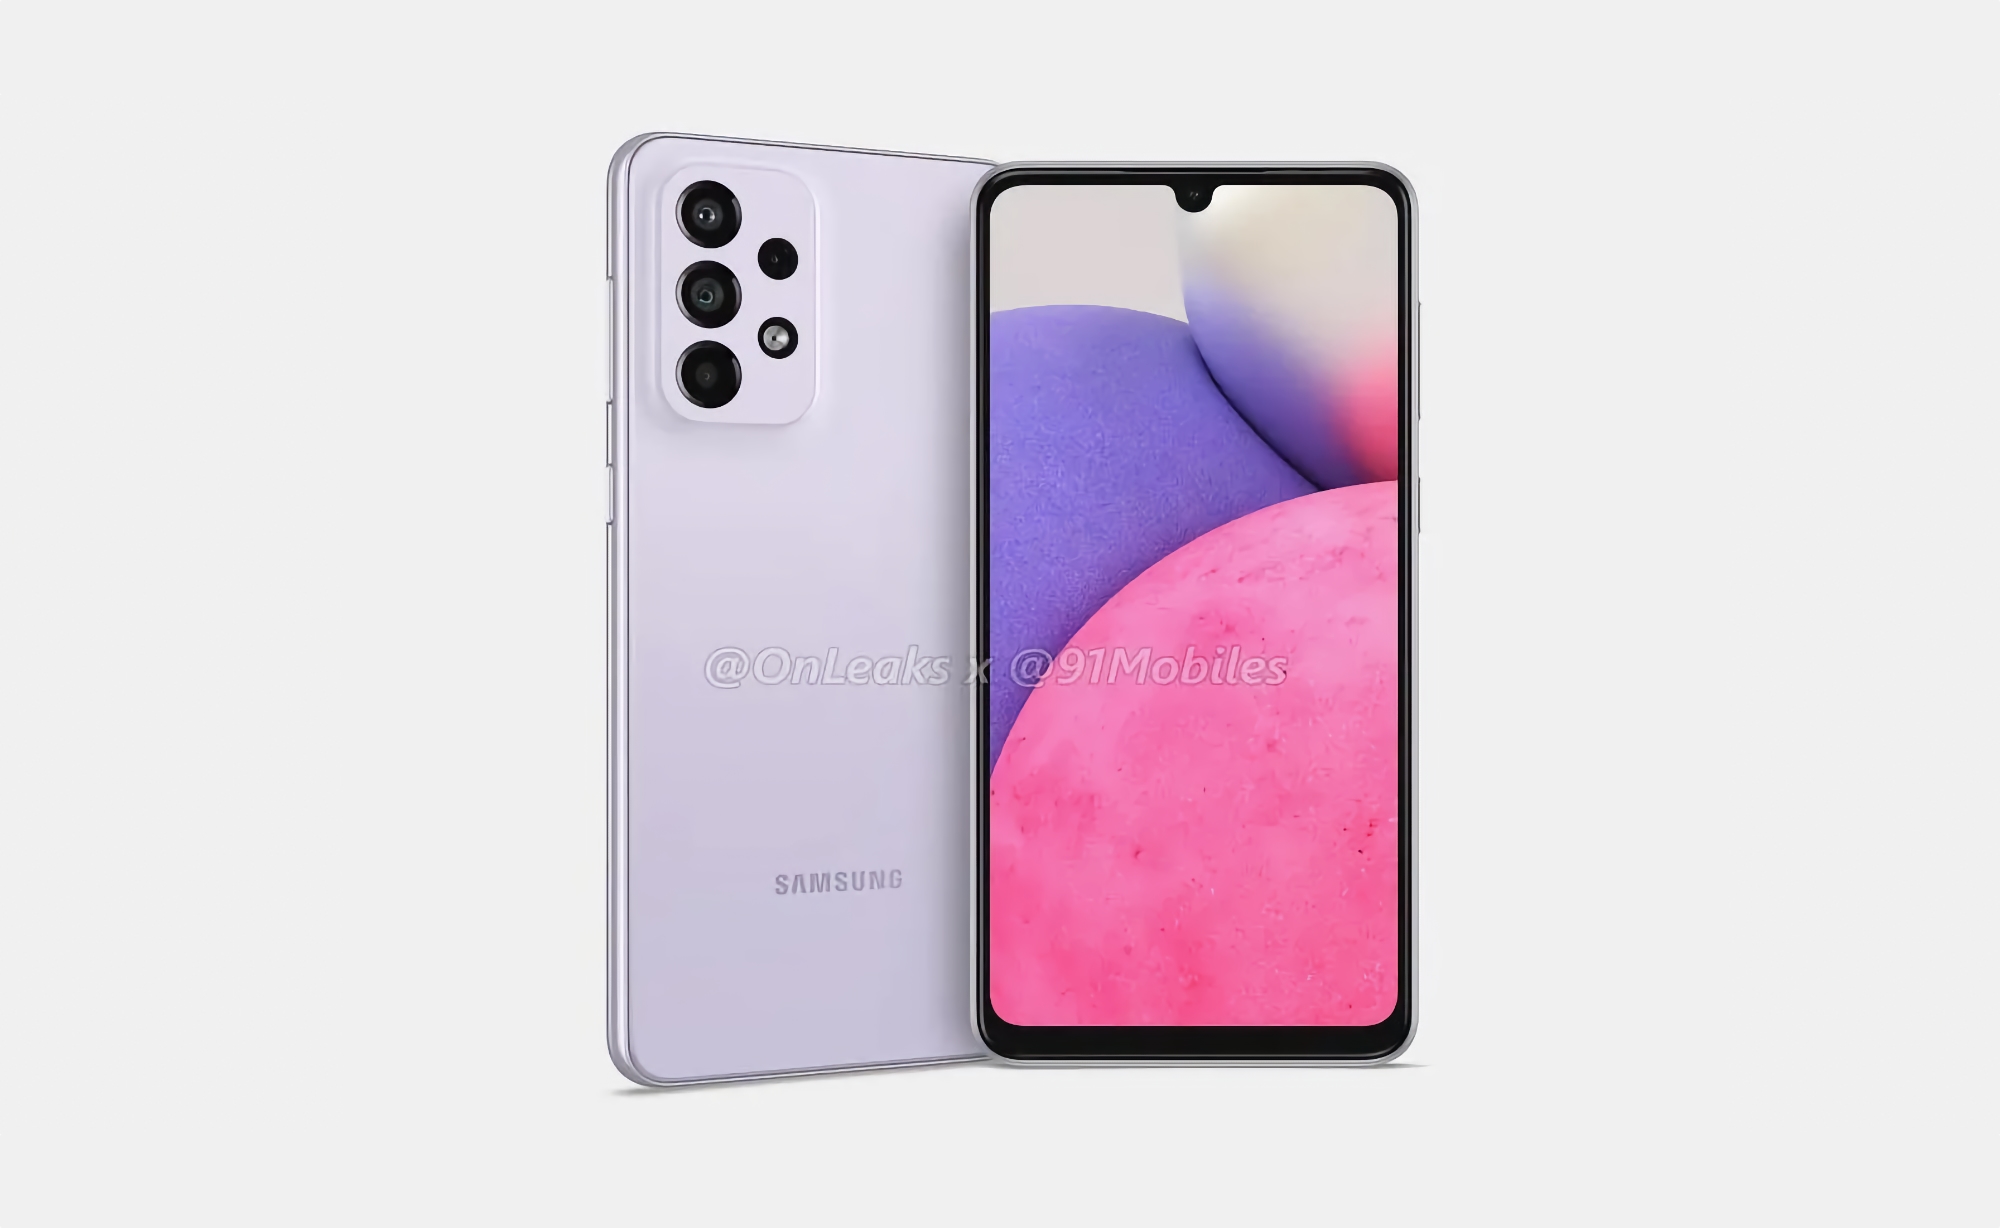 Samsung Galaxy M33 with 6000 mAh battery, AMOLED screen and quad camera will be presented in March